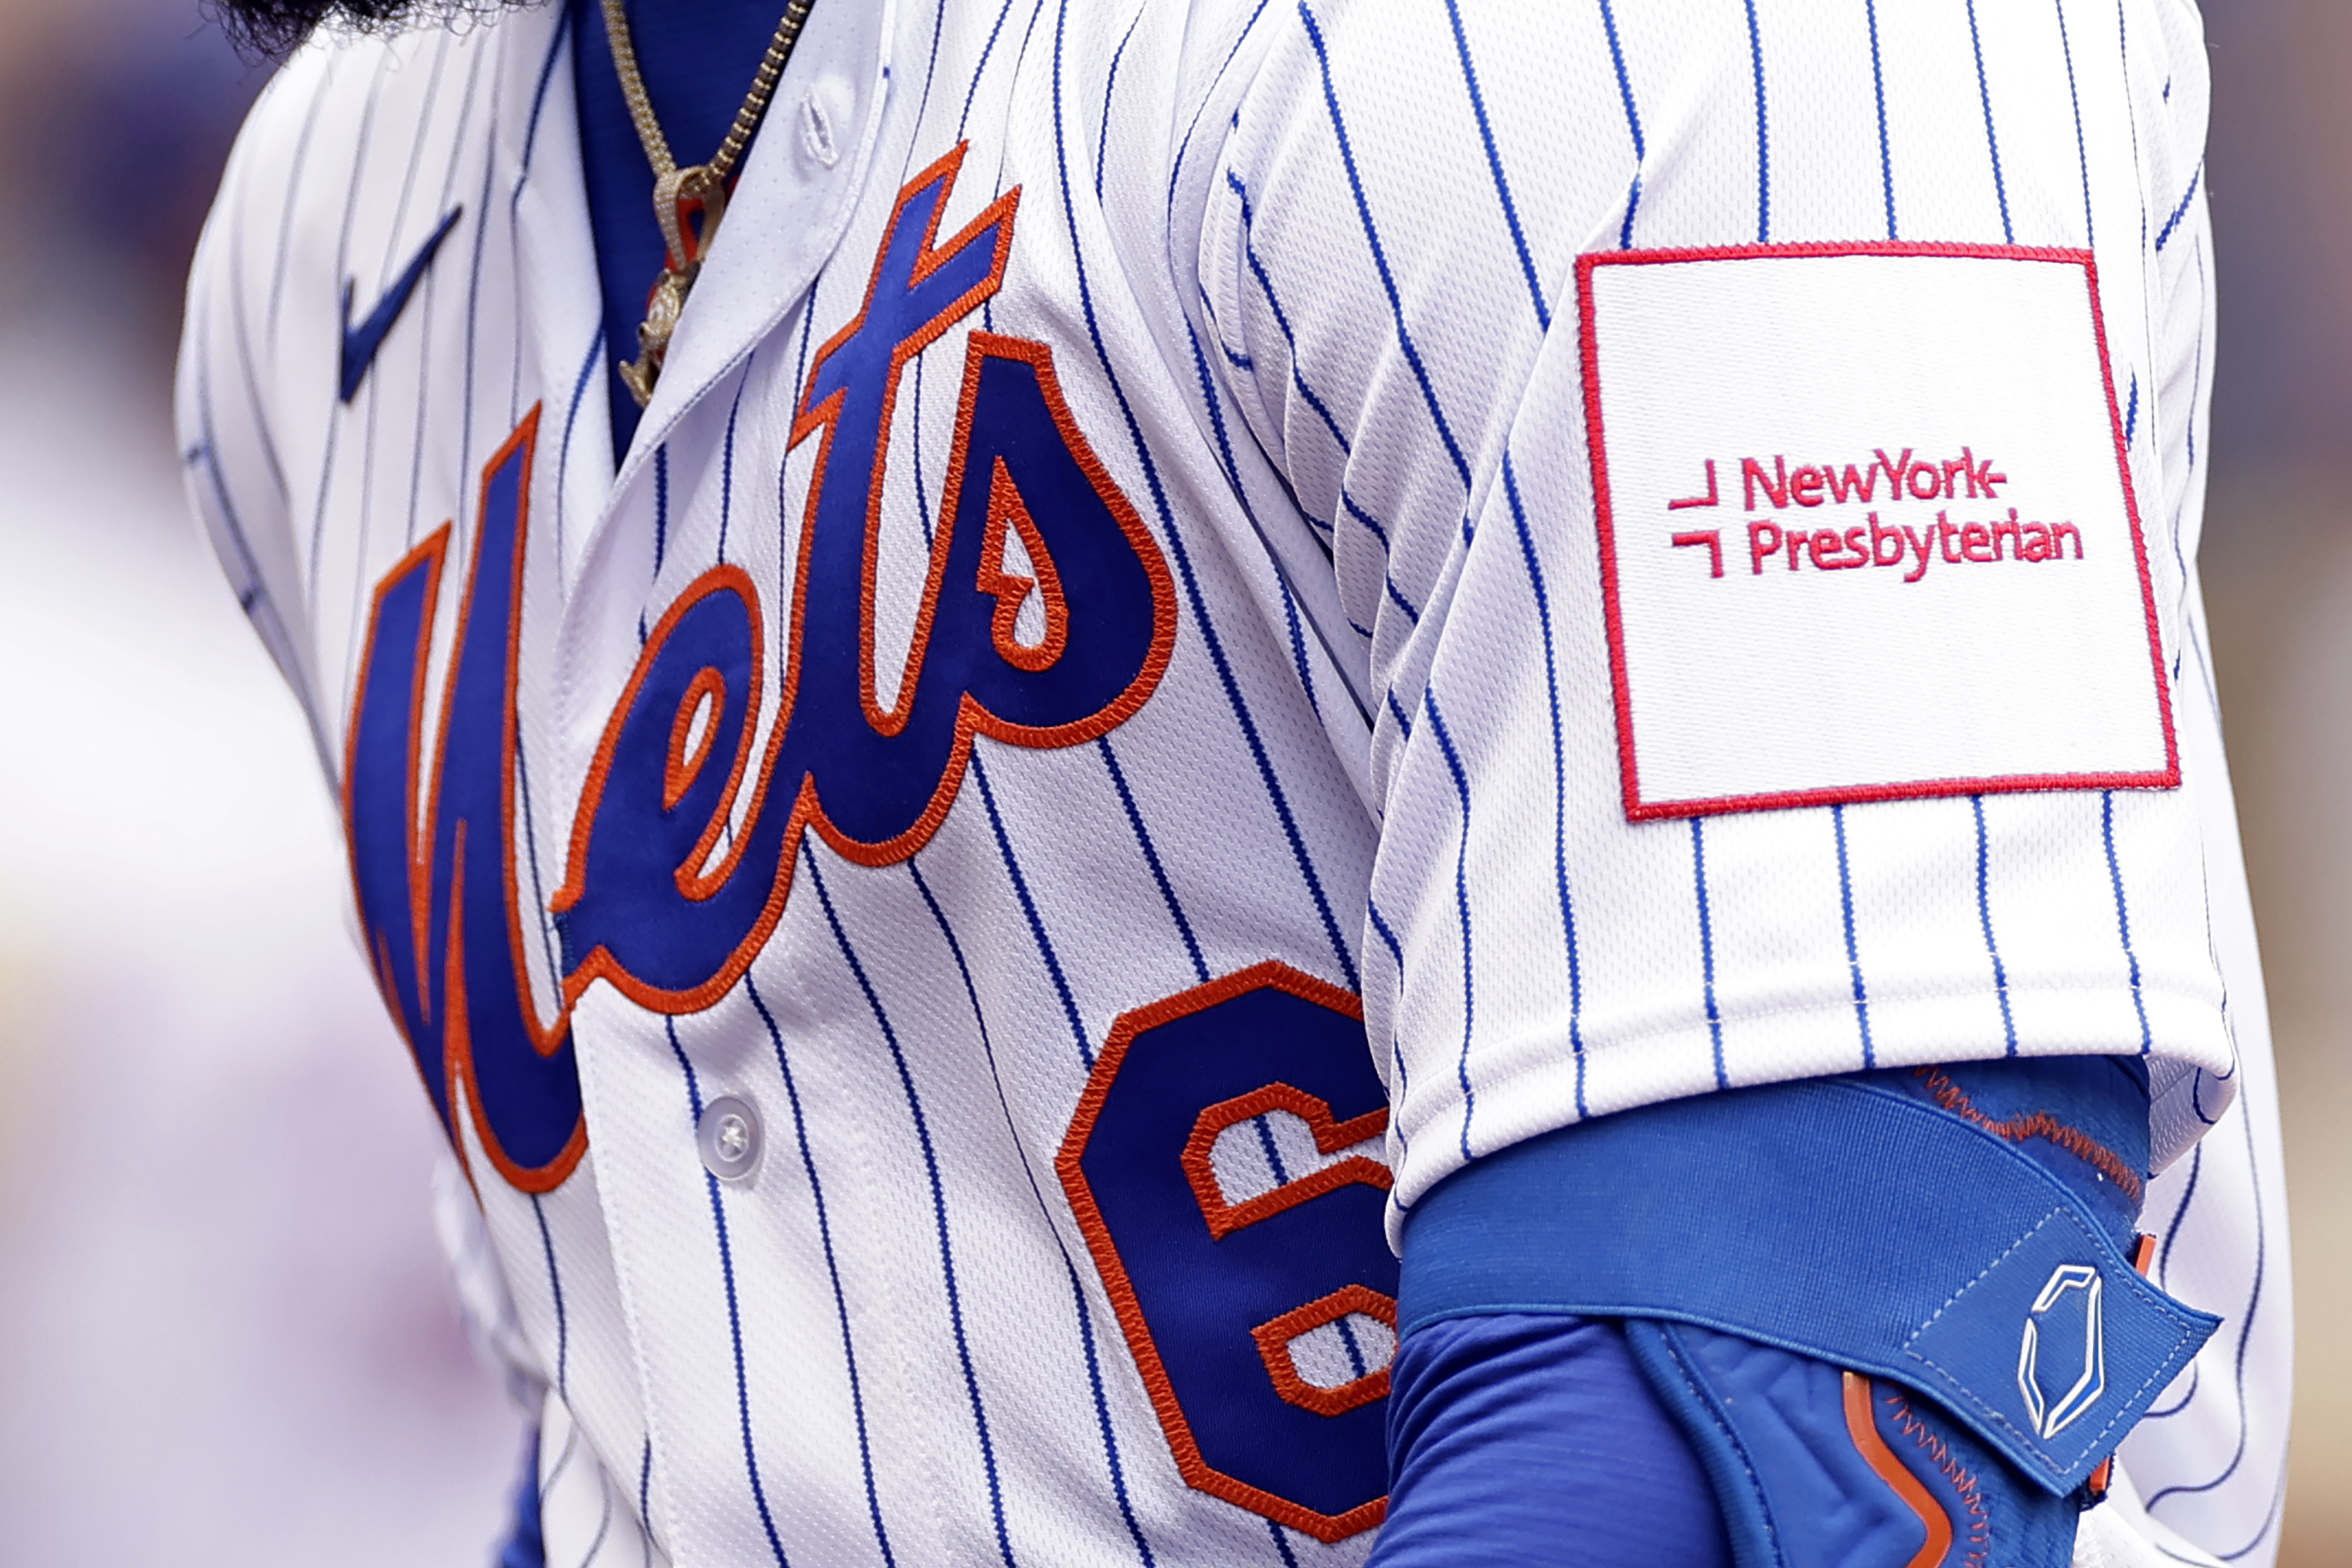 The Mets have their first patch sponsor: NewYork-Presbyterian. The